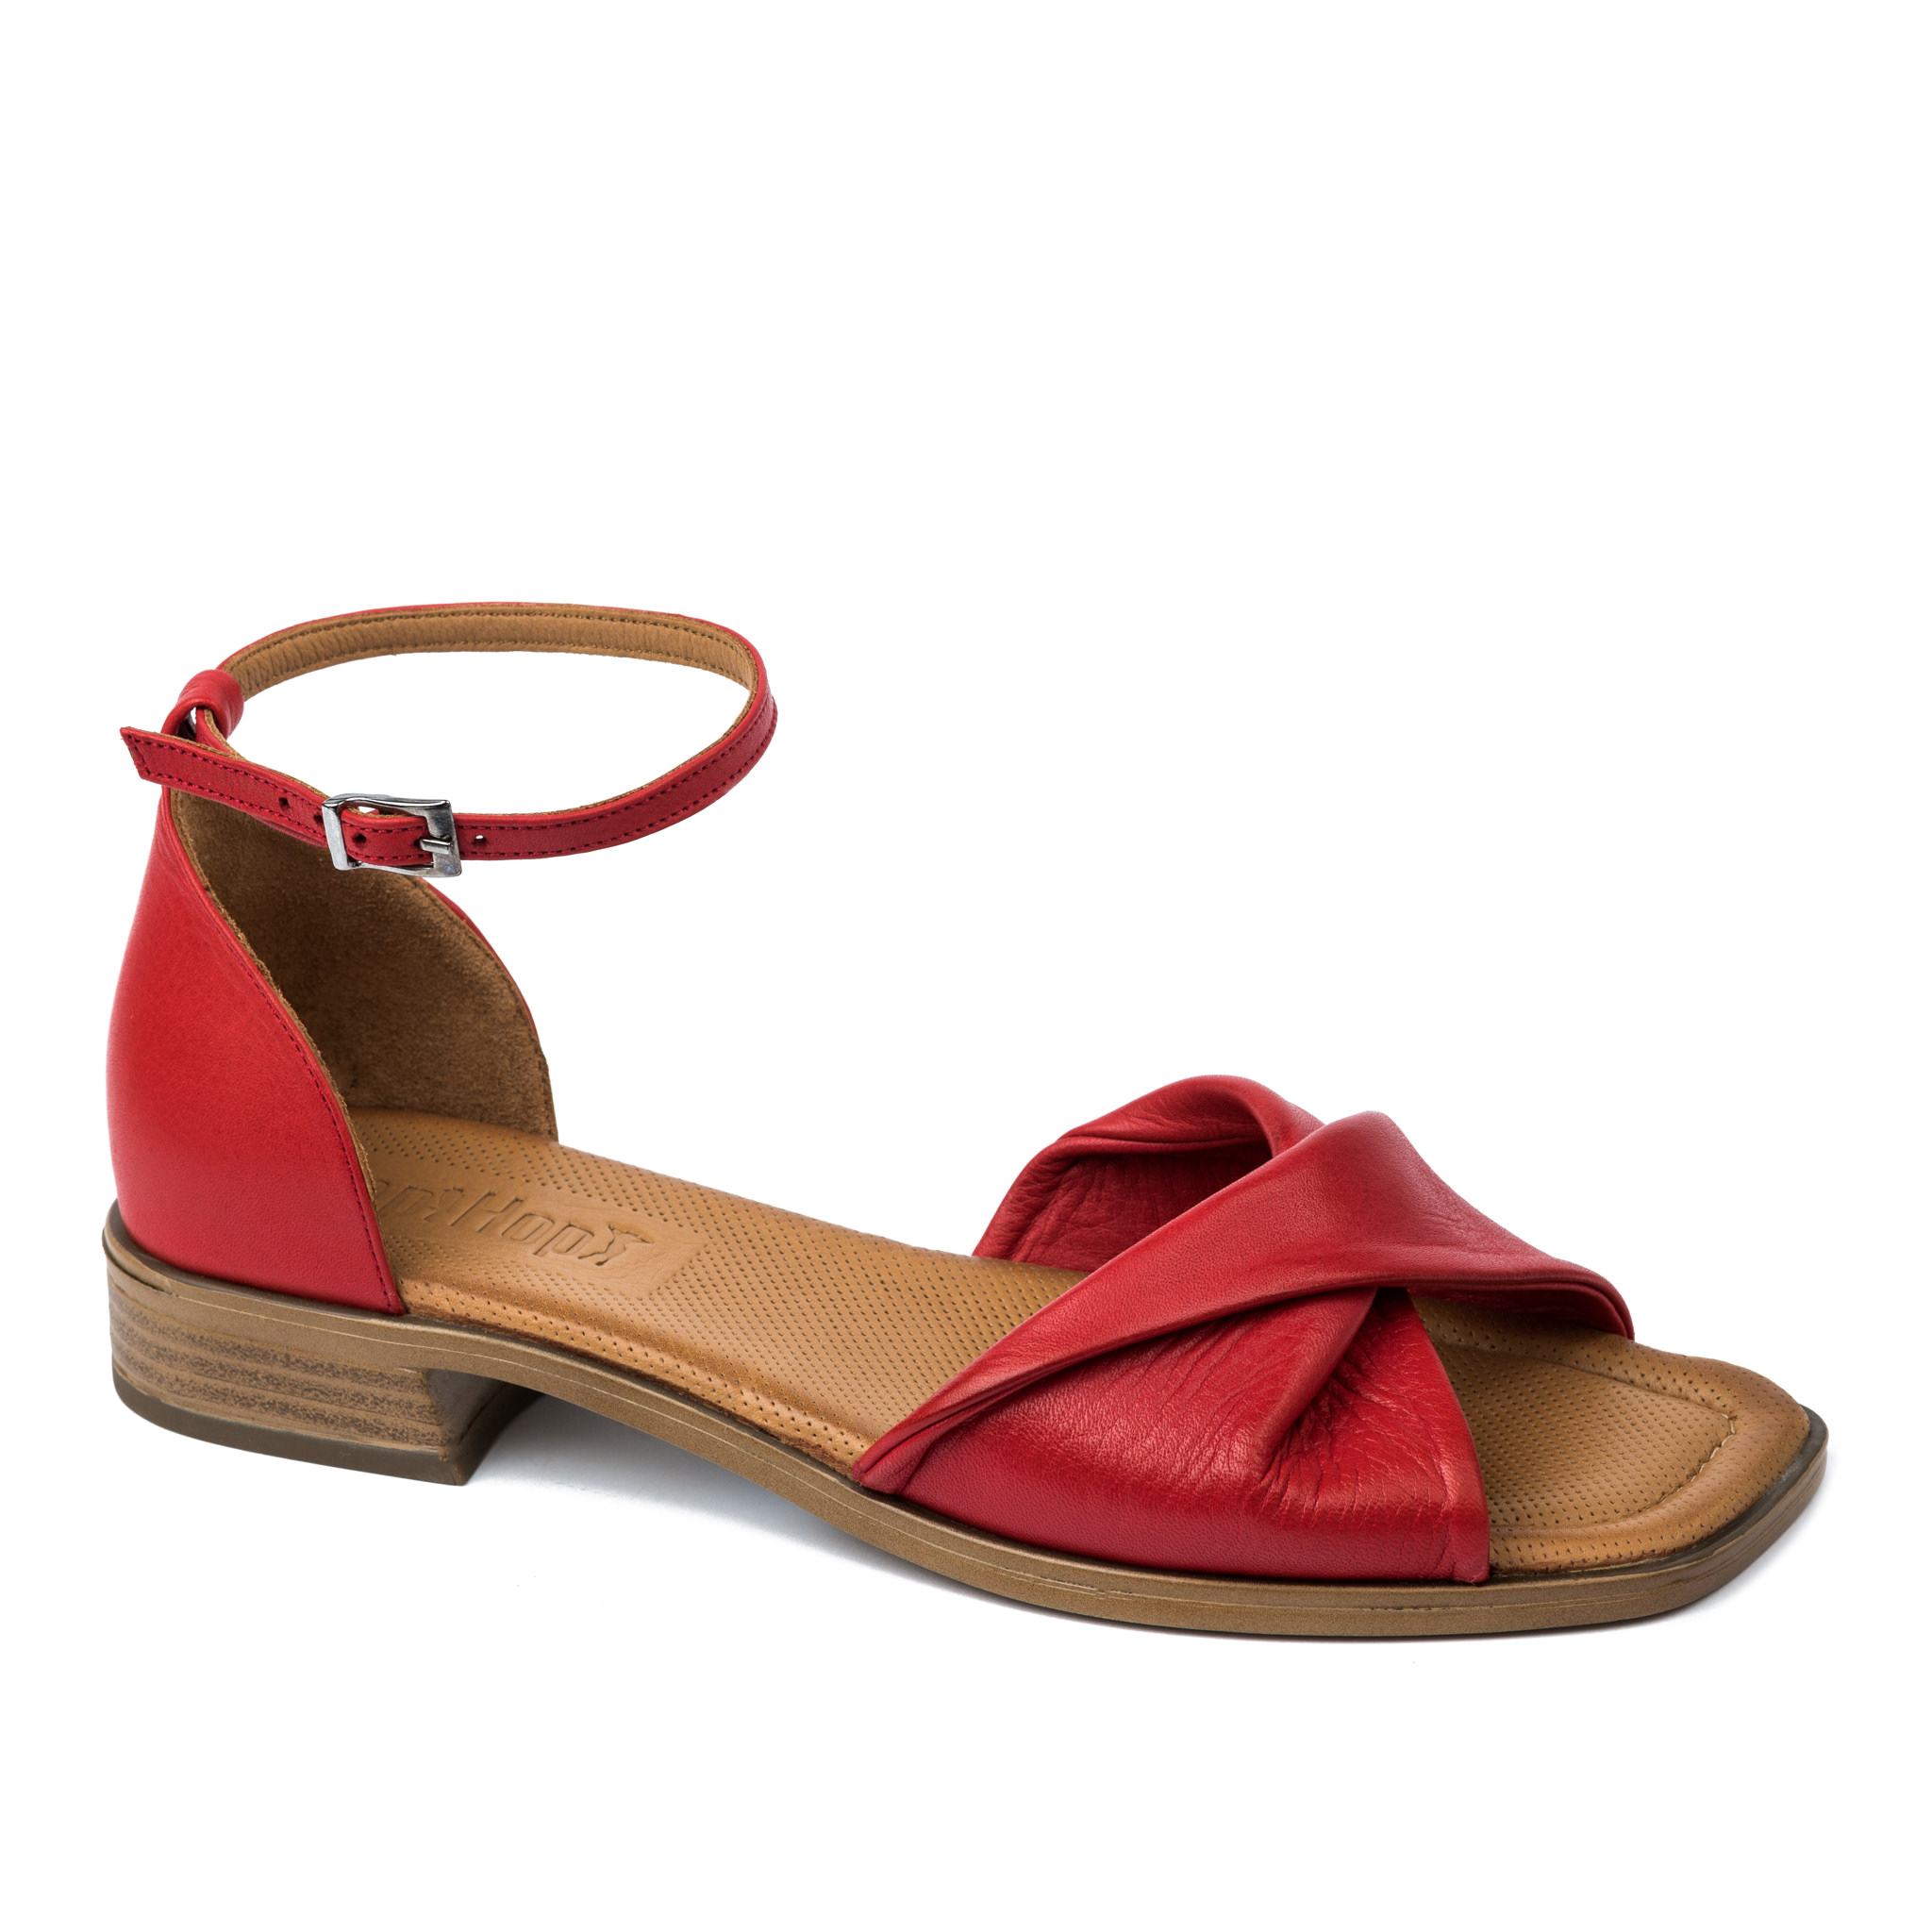 Leather sandals A701 - RED